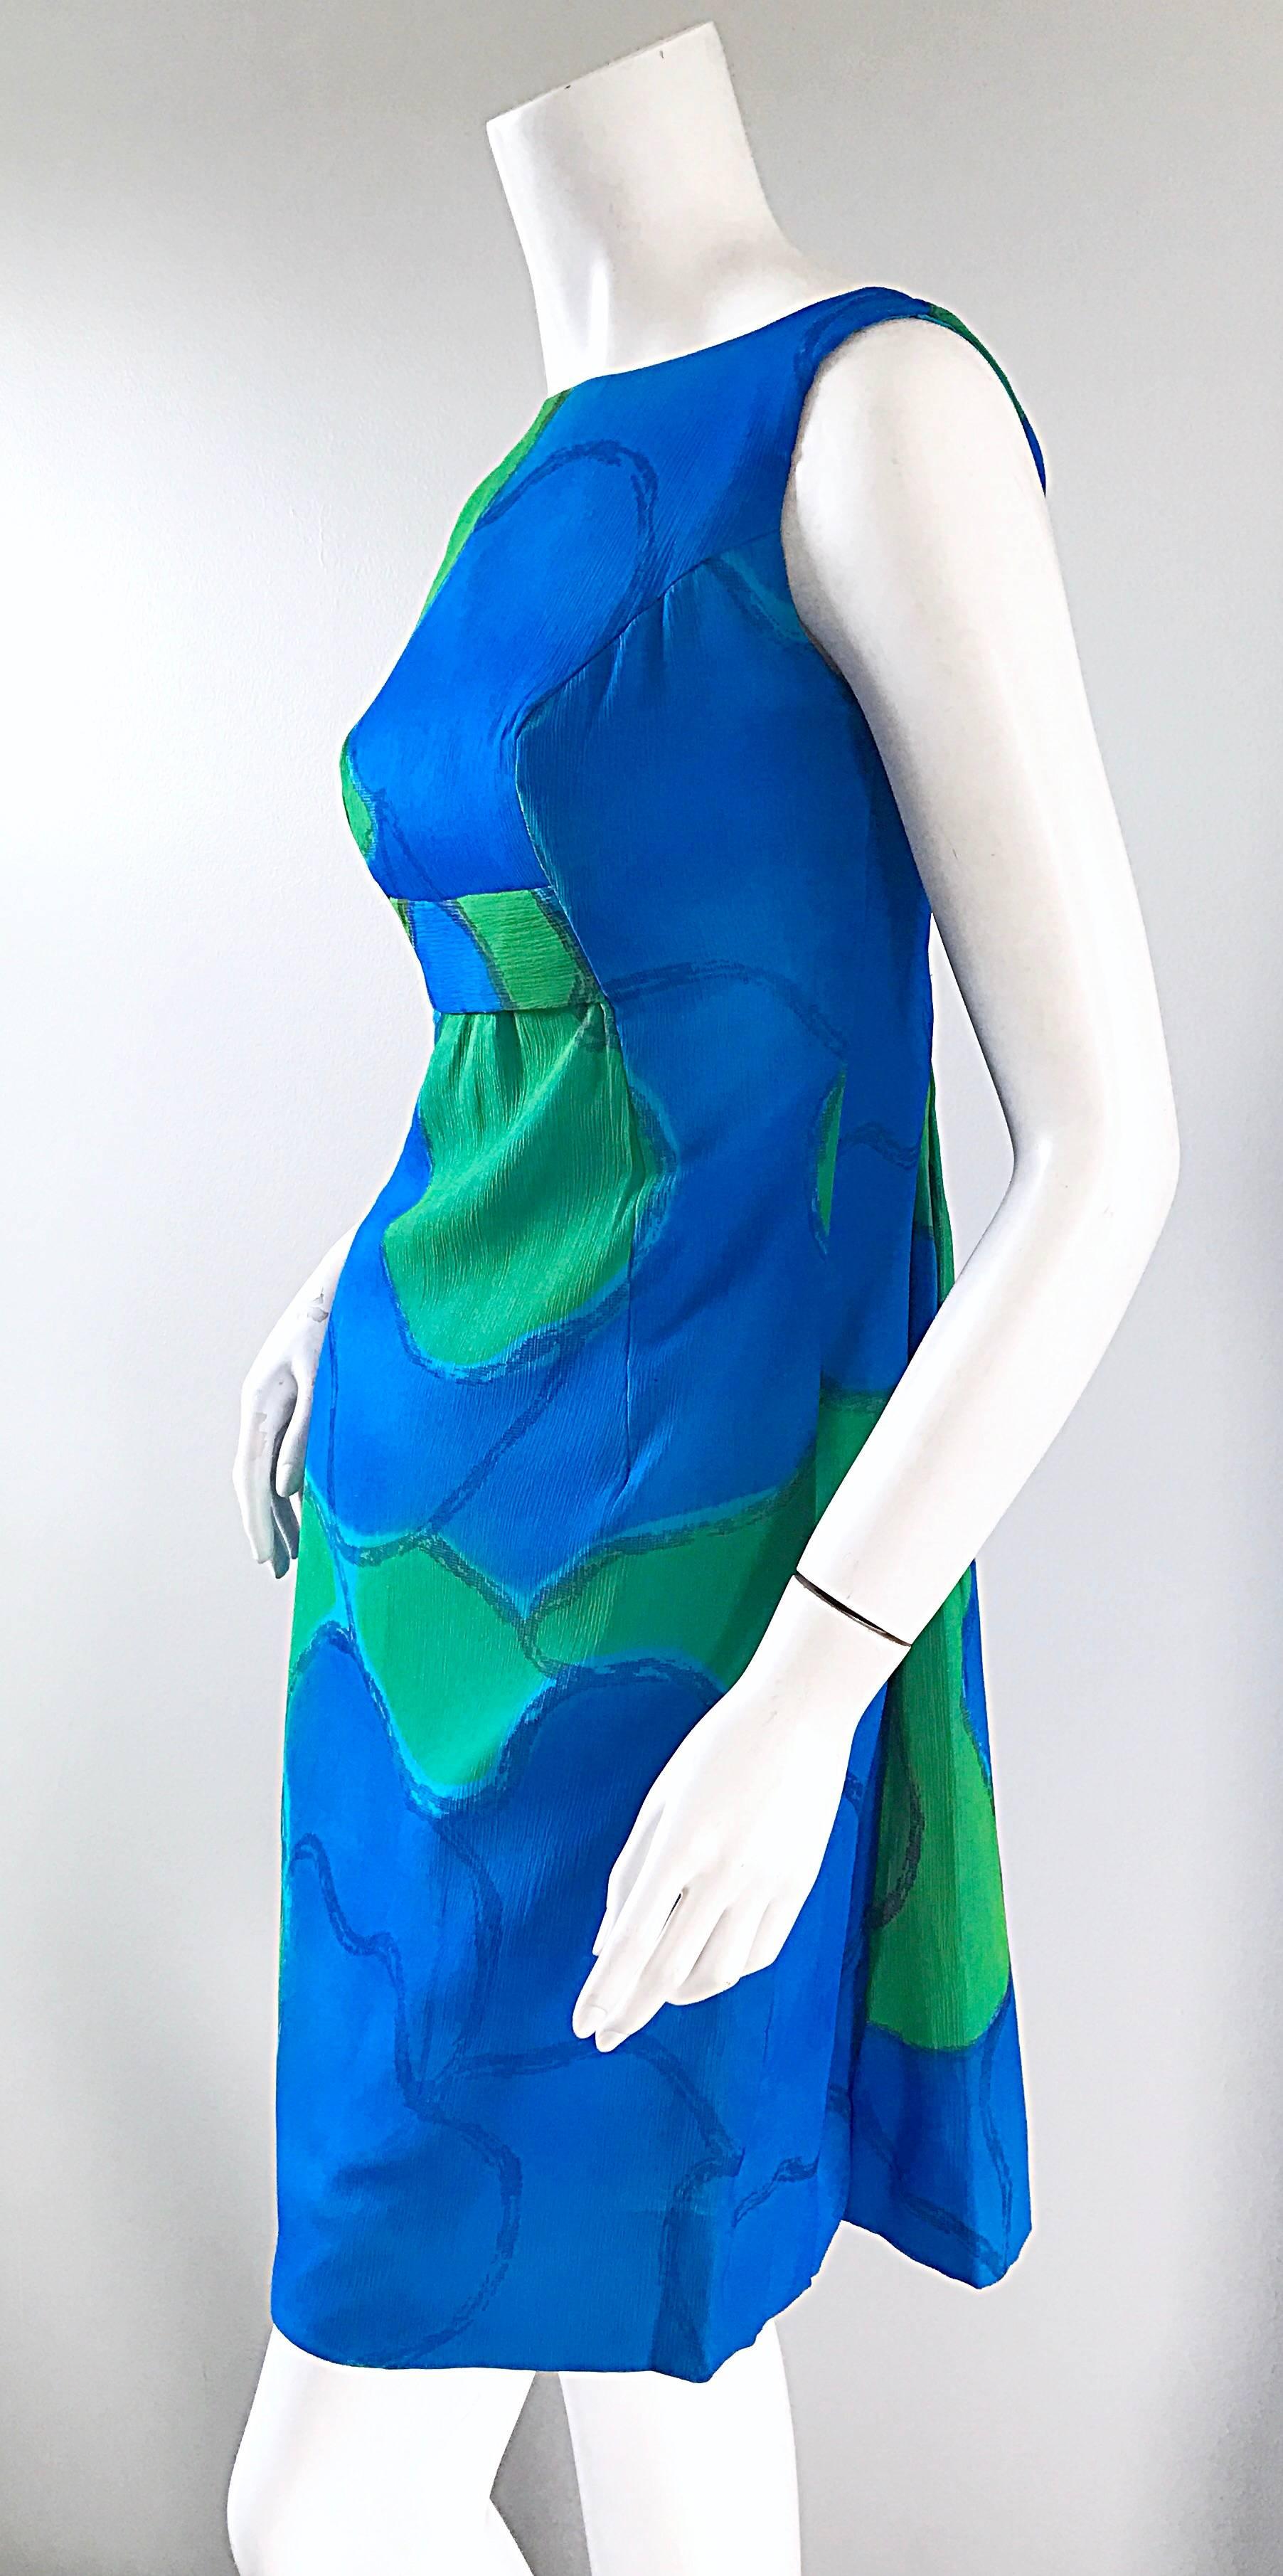 Women's Chic 1960s Turquoise Blue and Green Watercolor Chiffon Demi Couture Shift Dress For Sale